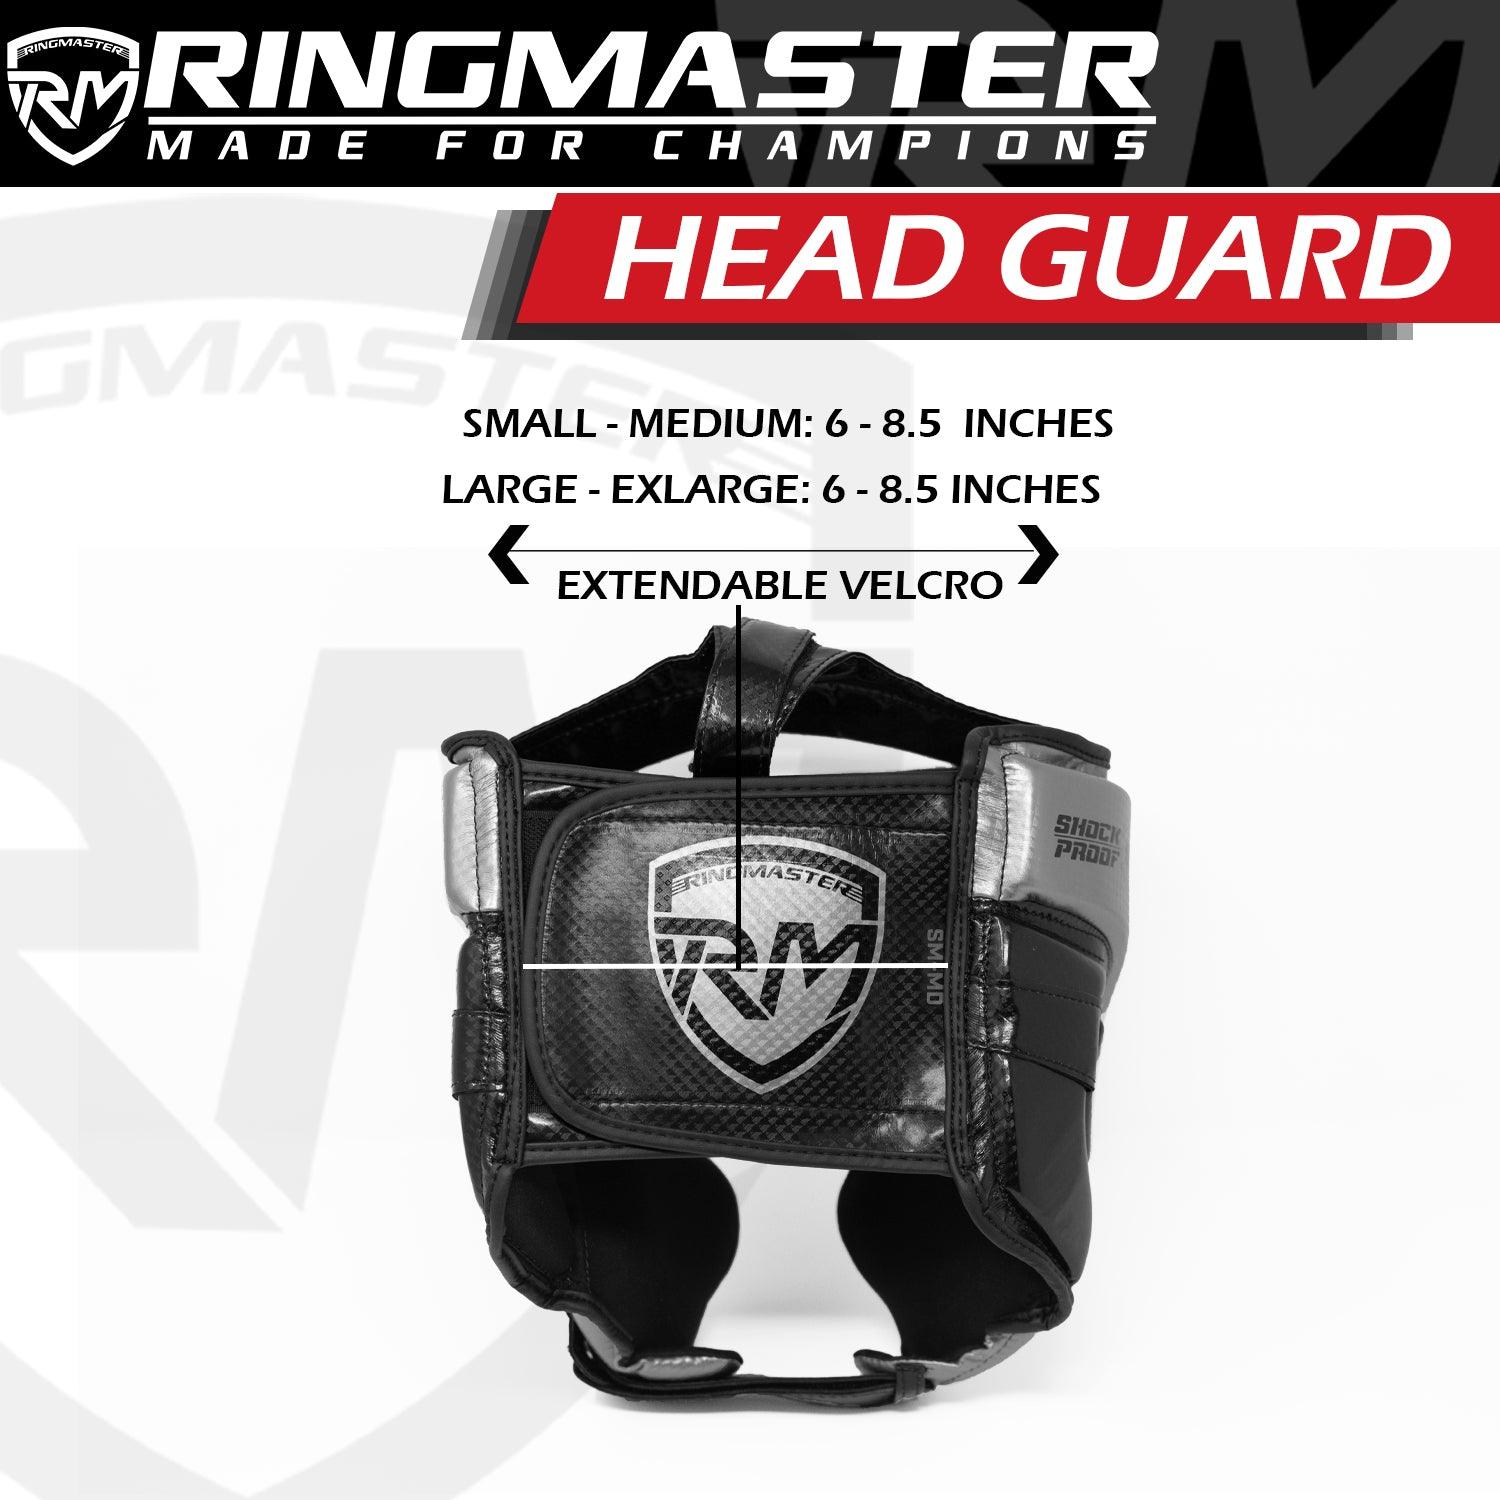 Ringmaster Head guard Boxing, Best boxing head guard, boxing head guard uk, MMA head guard, boxing headgear, MArtial Arts head guard, boxing head guard full face, Boxing head guard for sale, face guard boxing, Black and Silver Head guard, RingMaster Sports Boxing Head Guard SHK2.0 Series Black and Silver image 4